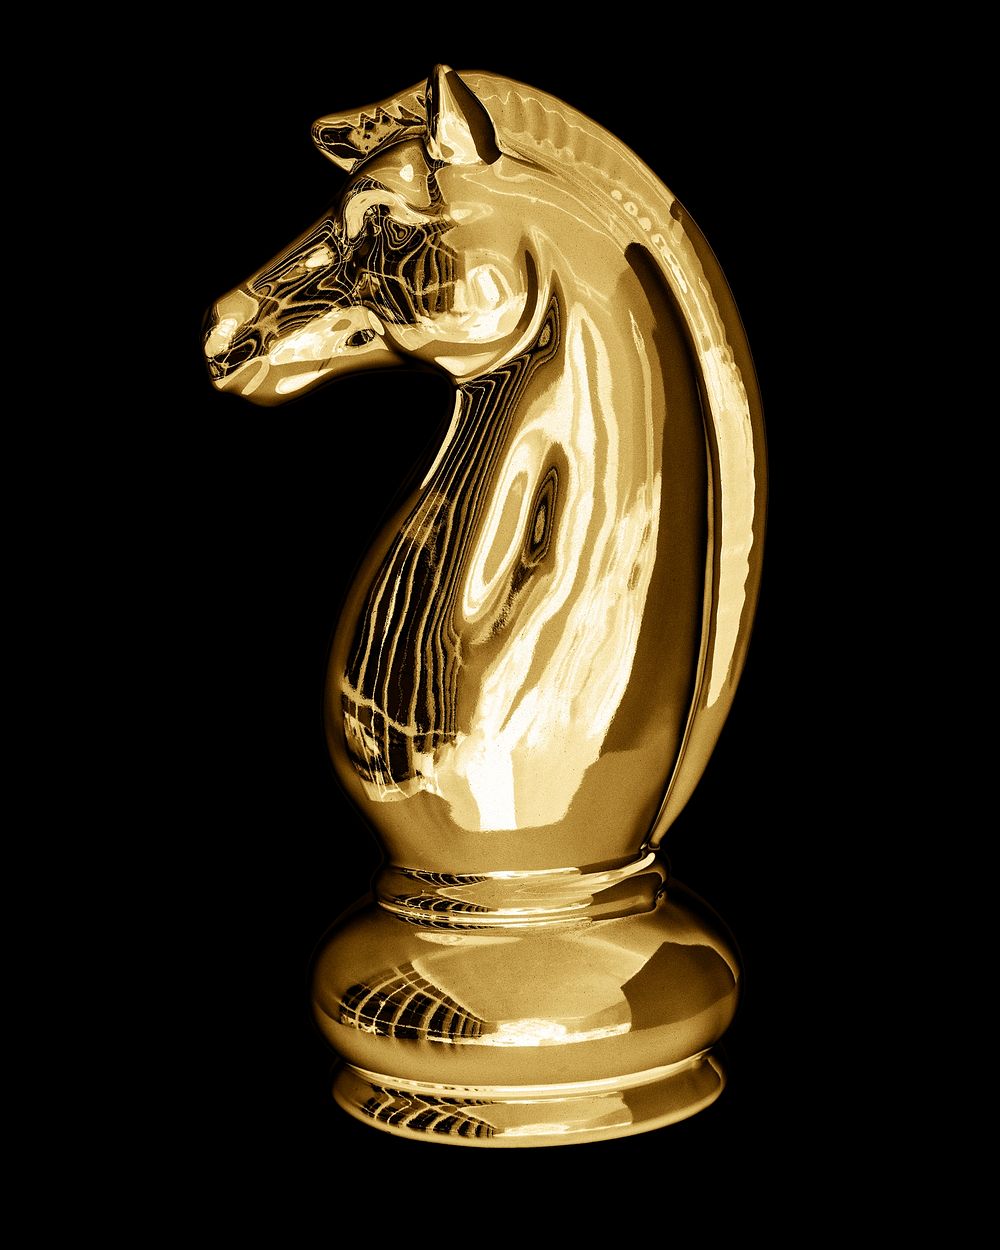 Gold knight chess piece on black background